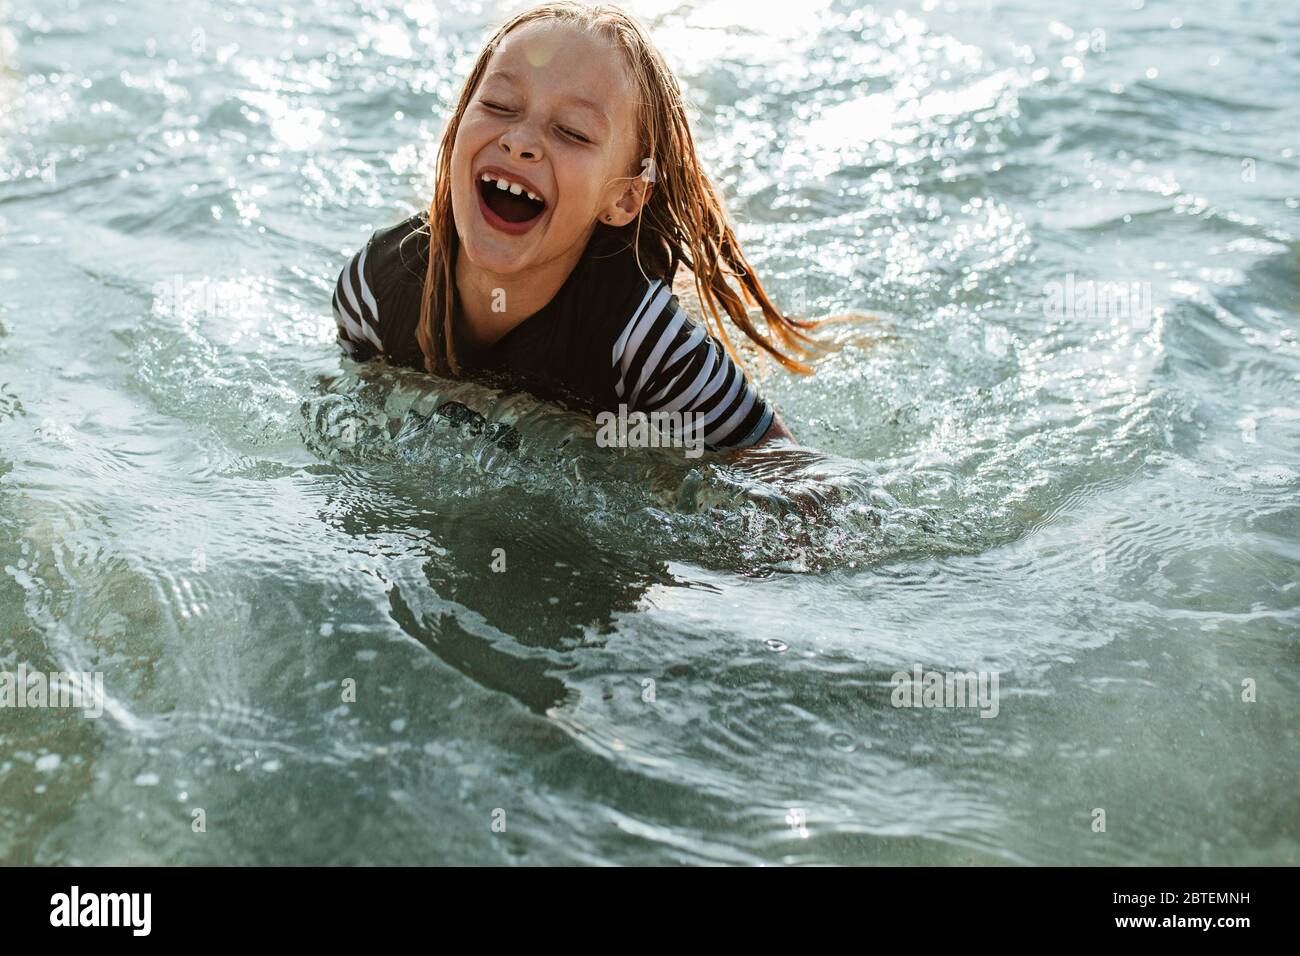 Excited girl enjoying swimming in the sea water. Young girl sitting in sea water and smiling. Stock Photo